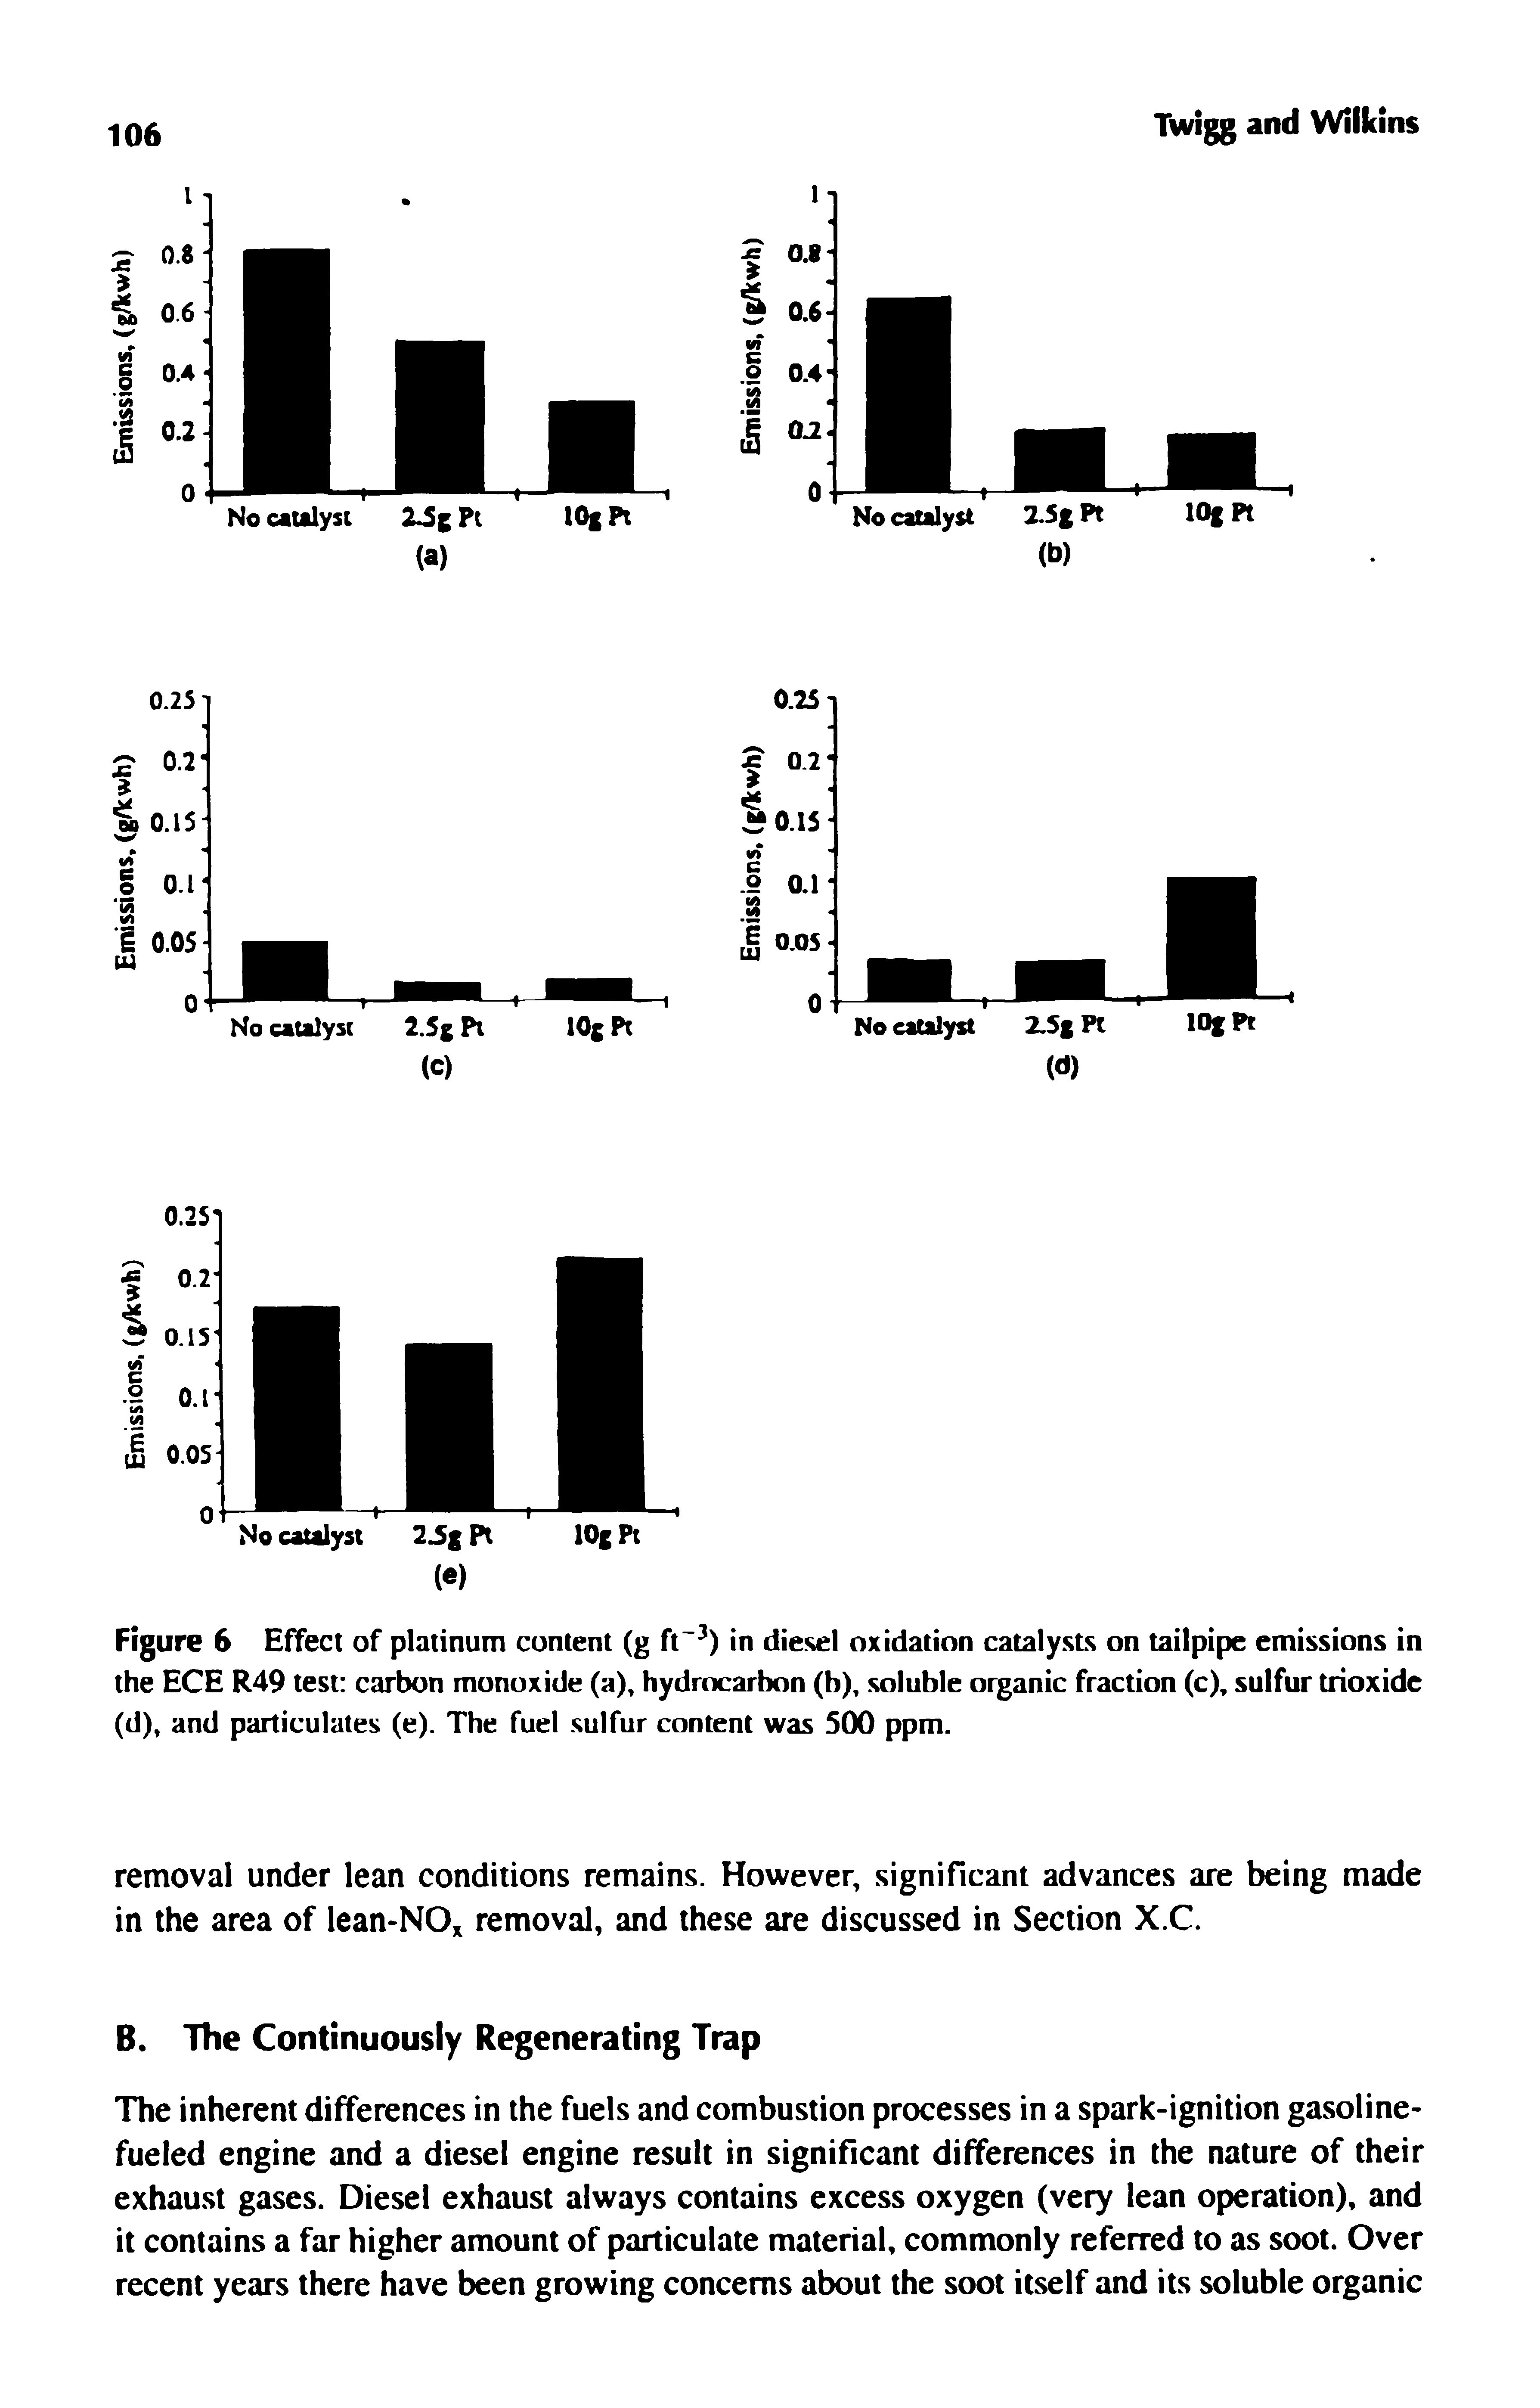 Figure 6 Effect of platinum content (g ft ) in diesel oxidation catalysts on tailpipe emissions in the ECE R49 test carbon monoxide (a), hydrocarbon (b), soluble organic fraction (c), sulfur trioxide (d), and particulates (e). The fuel sulfur content was 500 ppm.